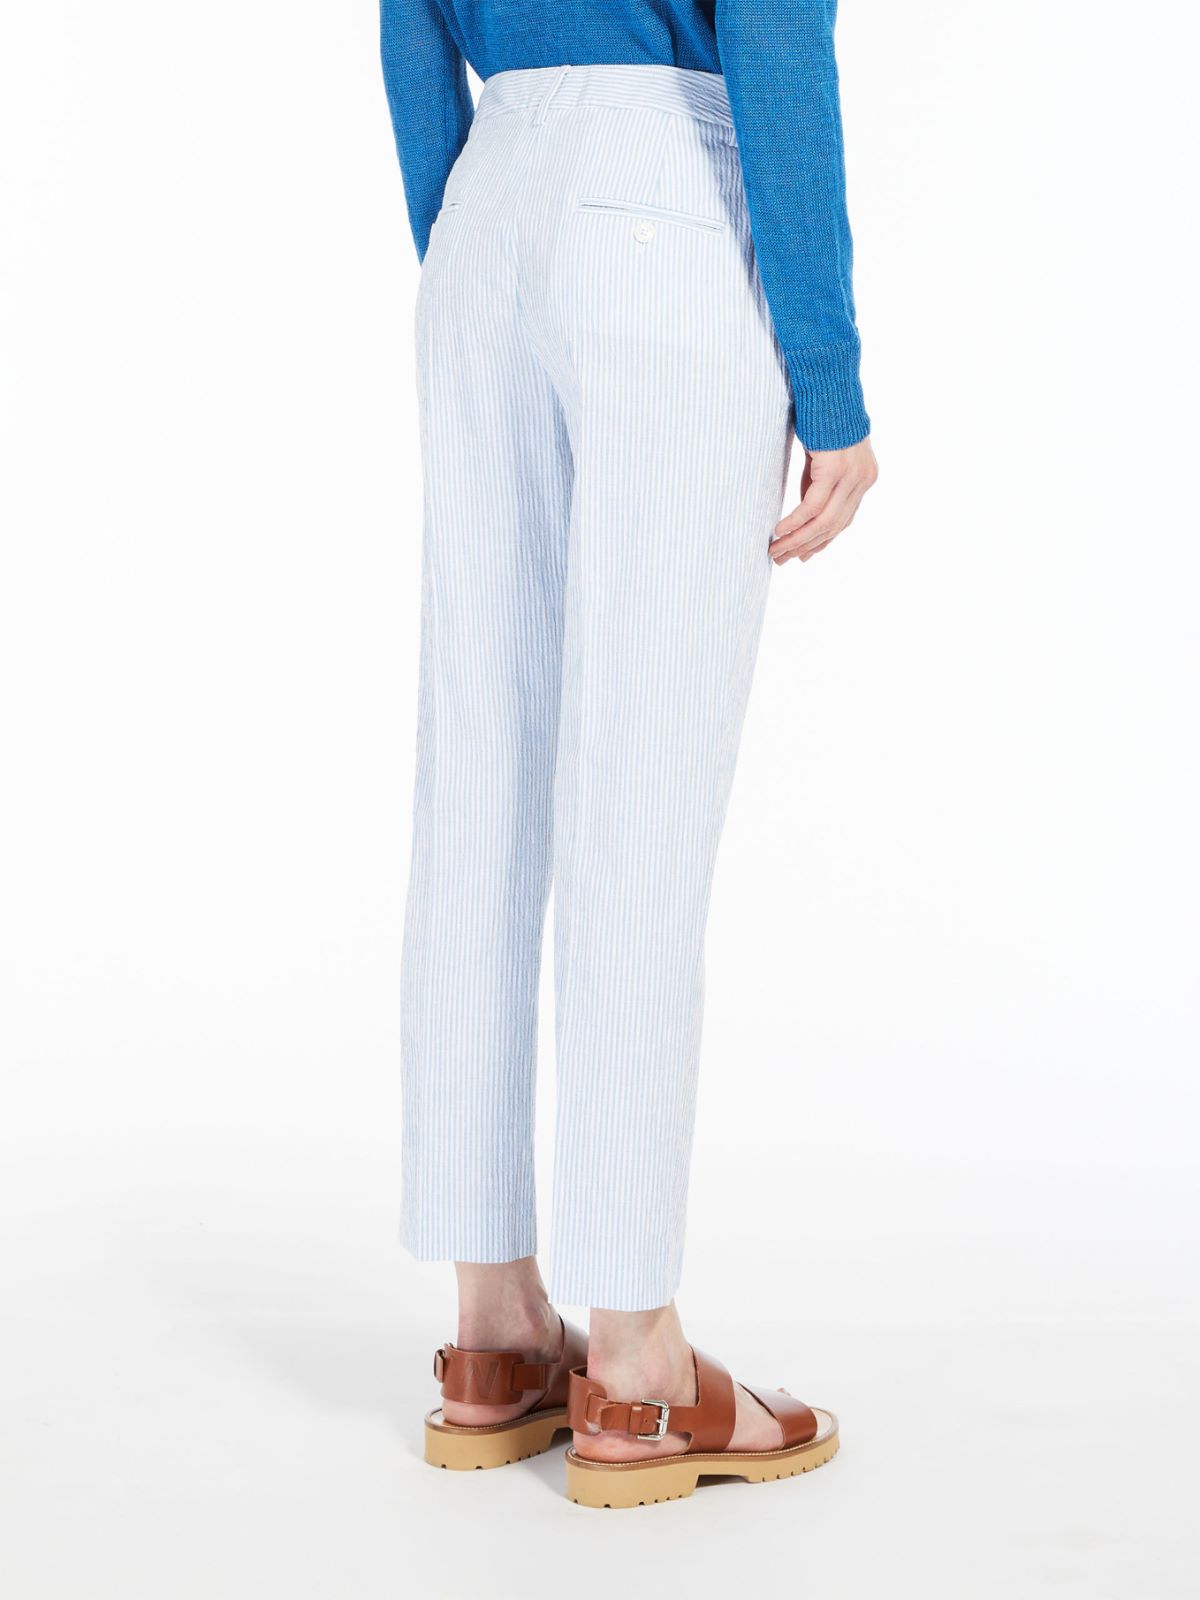 Cotton and linen trousers - LIGHT BLUE - Weekend Max Mara - 3